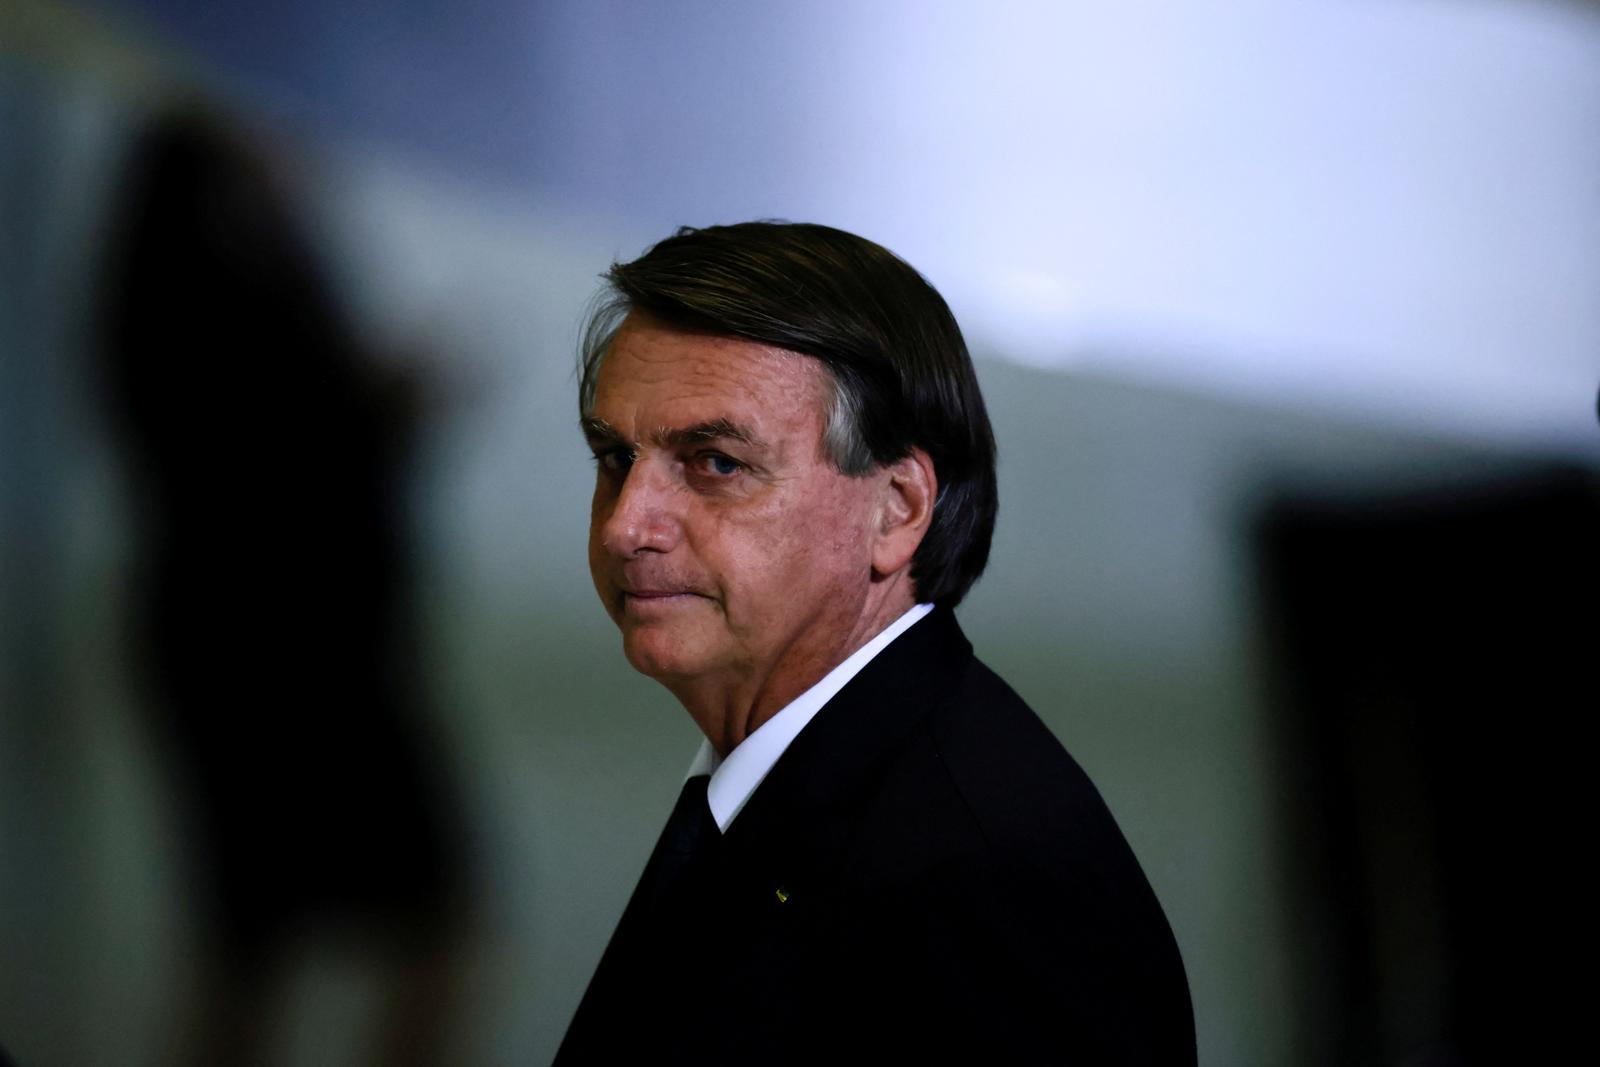 FILE PHOTO: Brazil's President Jair Bolsonaro looks on after a ceremony about the National Policy for Education at the Planalto Palace in Brasilia, Brazil June 20, 2022. REUTERS/Ueslei Marcelino/File Photo Photo: UESLEI MARCELINO/REUTERS